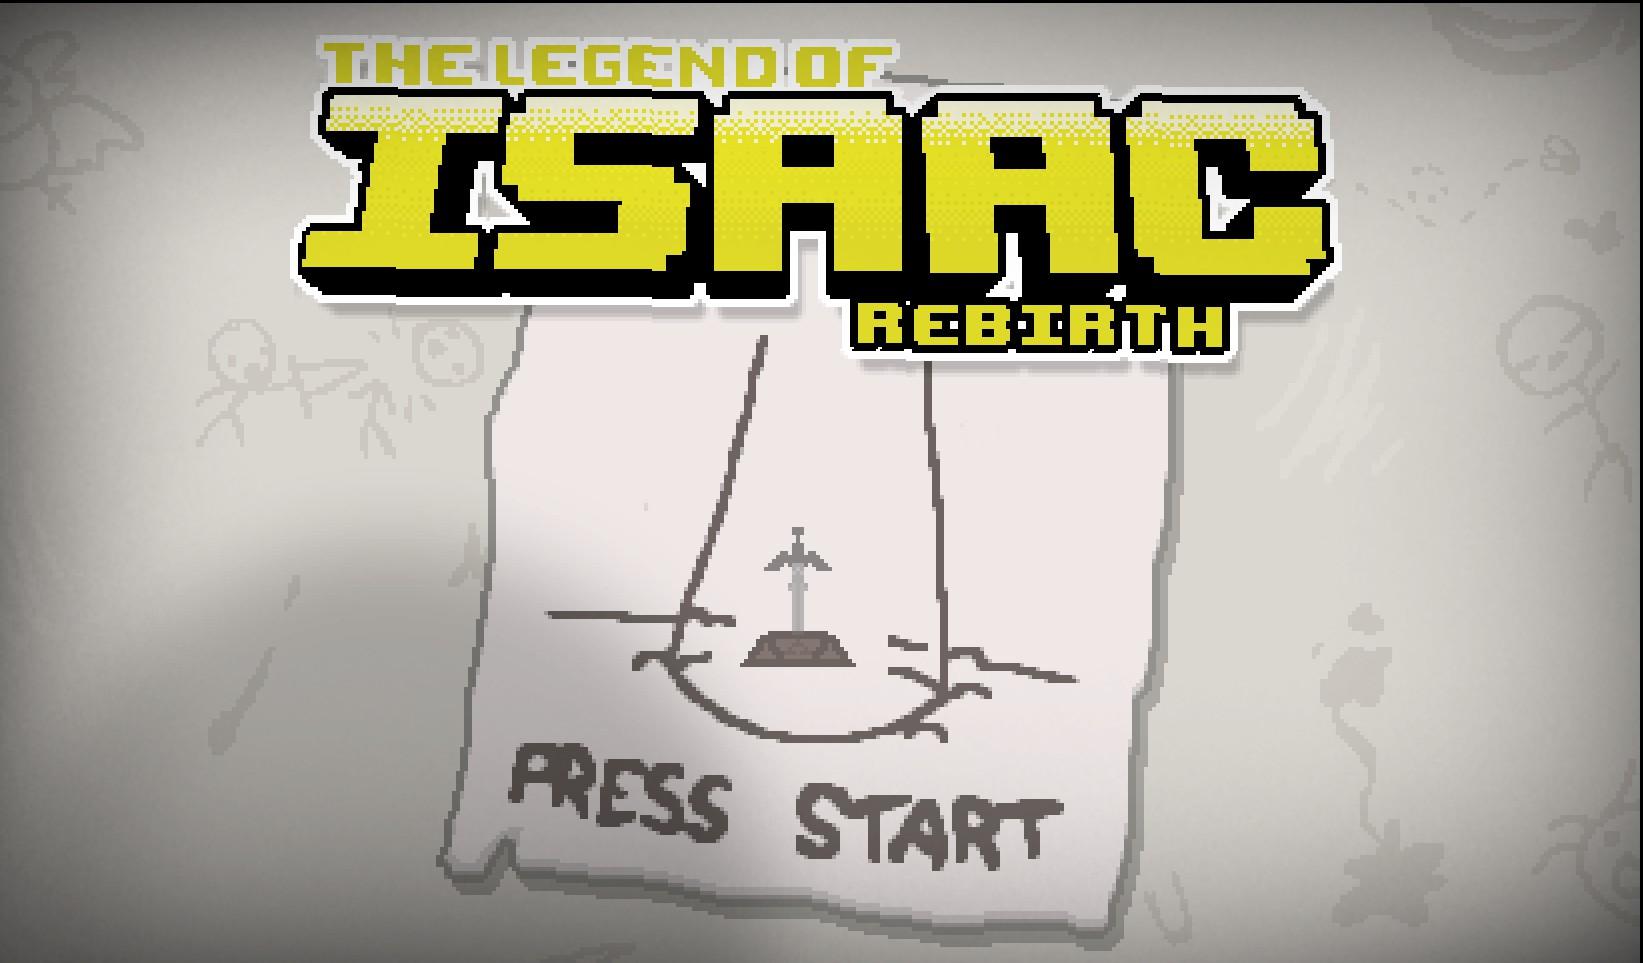 the rebirth of isaac download